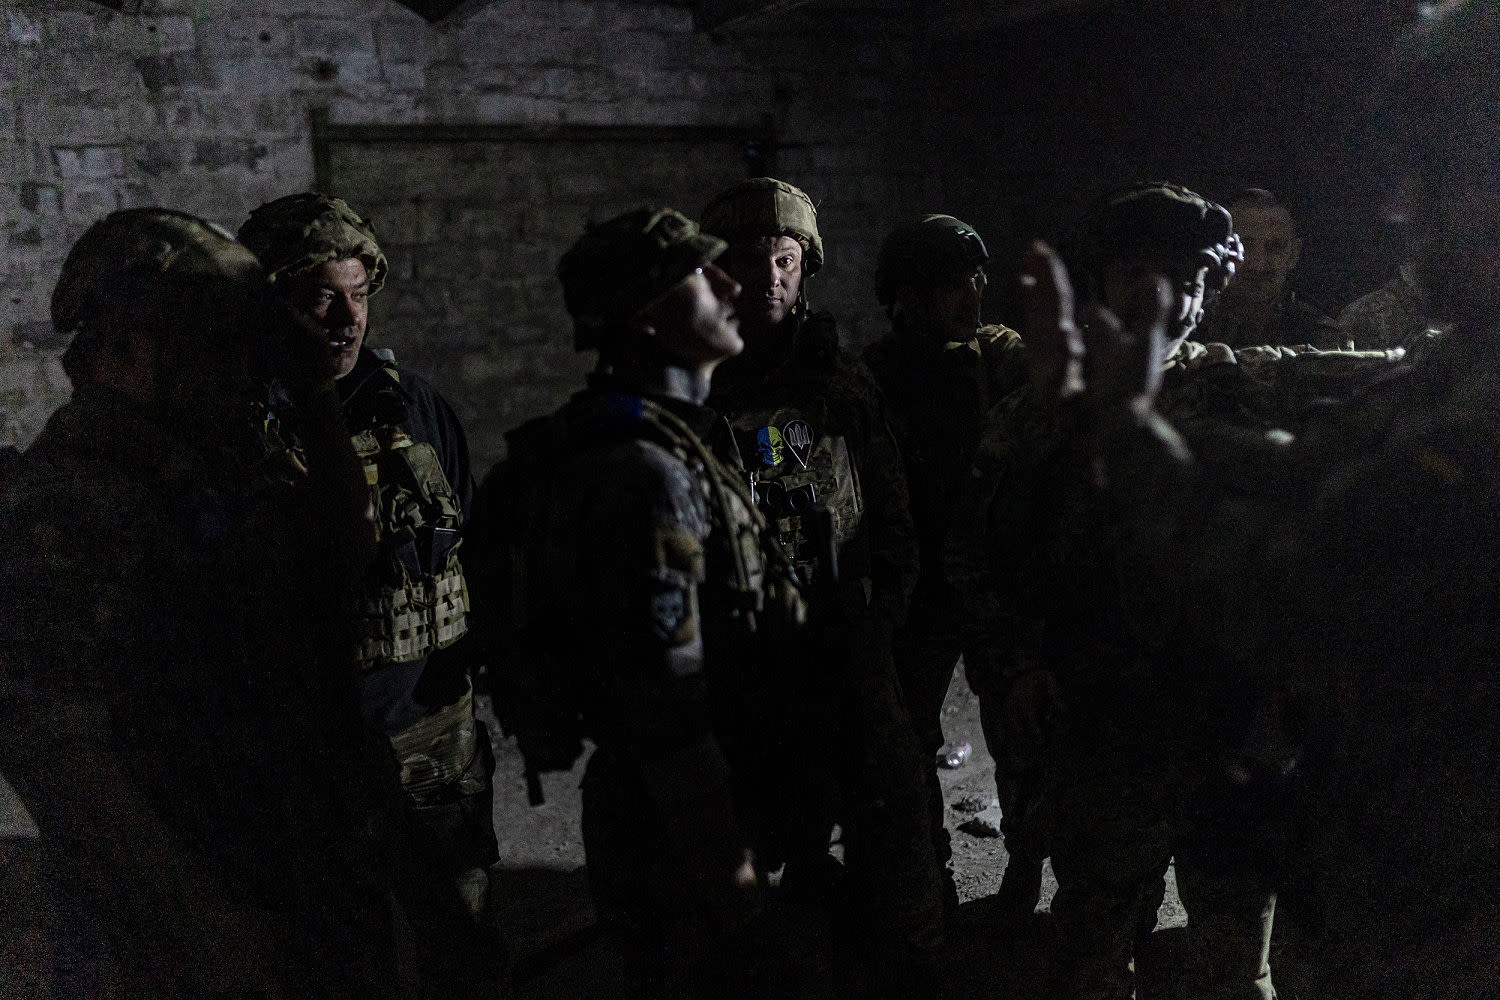 Ukraine urgently needs soldiers, but some men are desperate not to fight